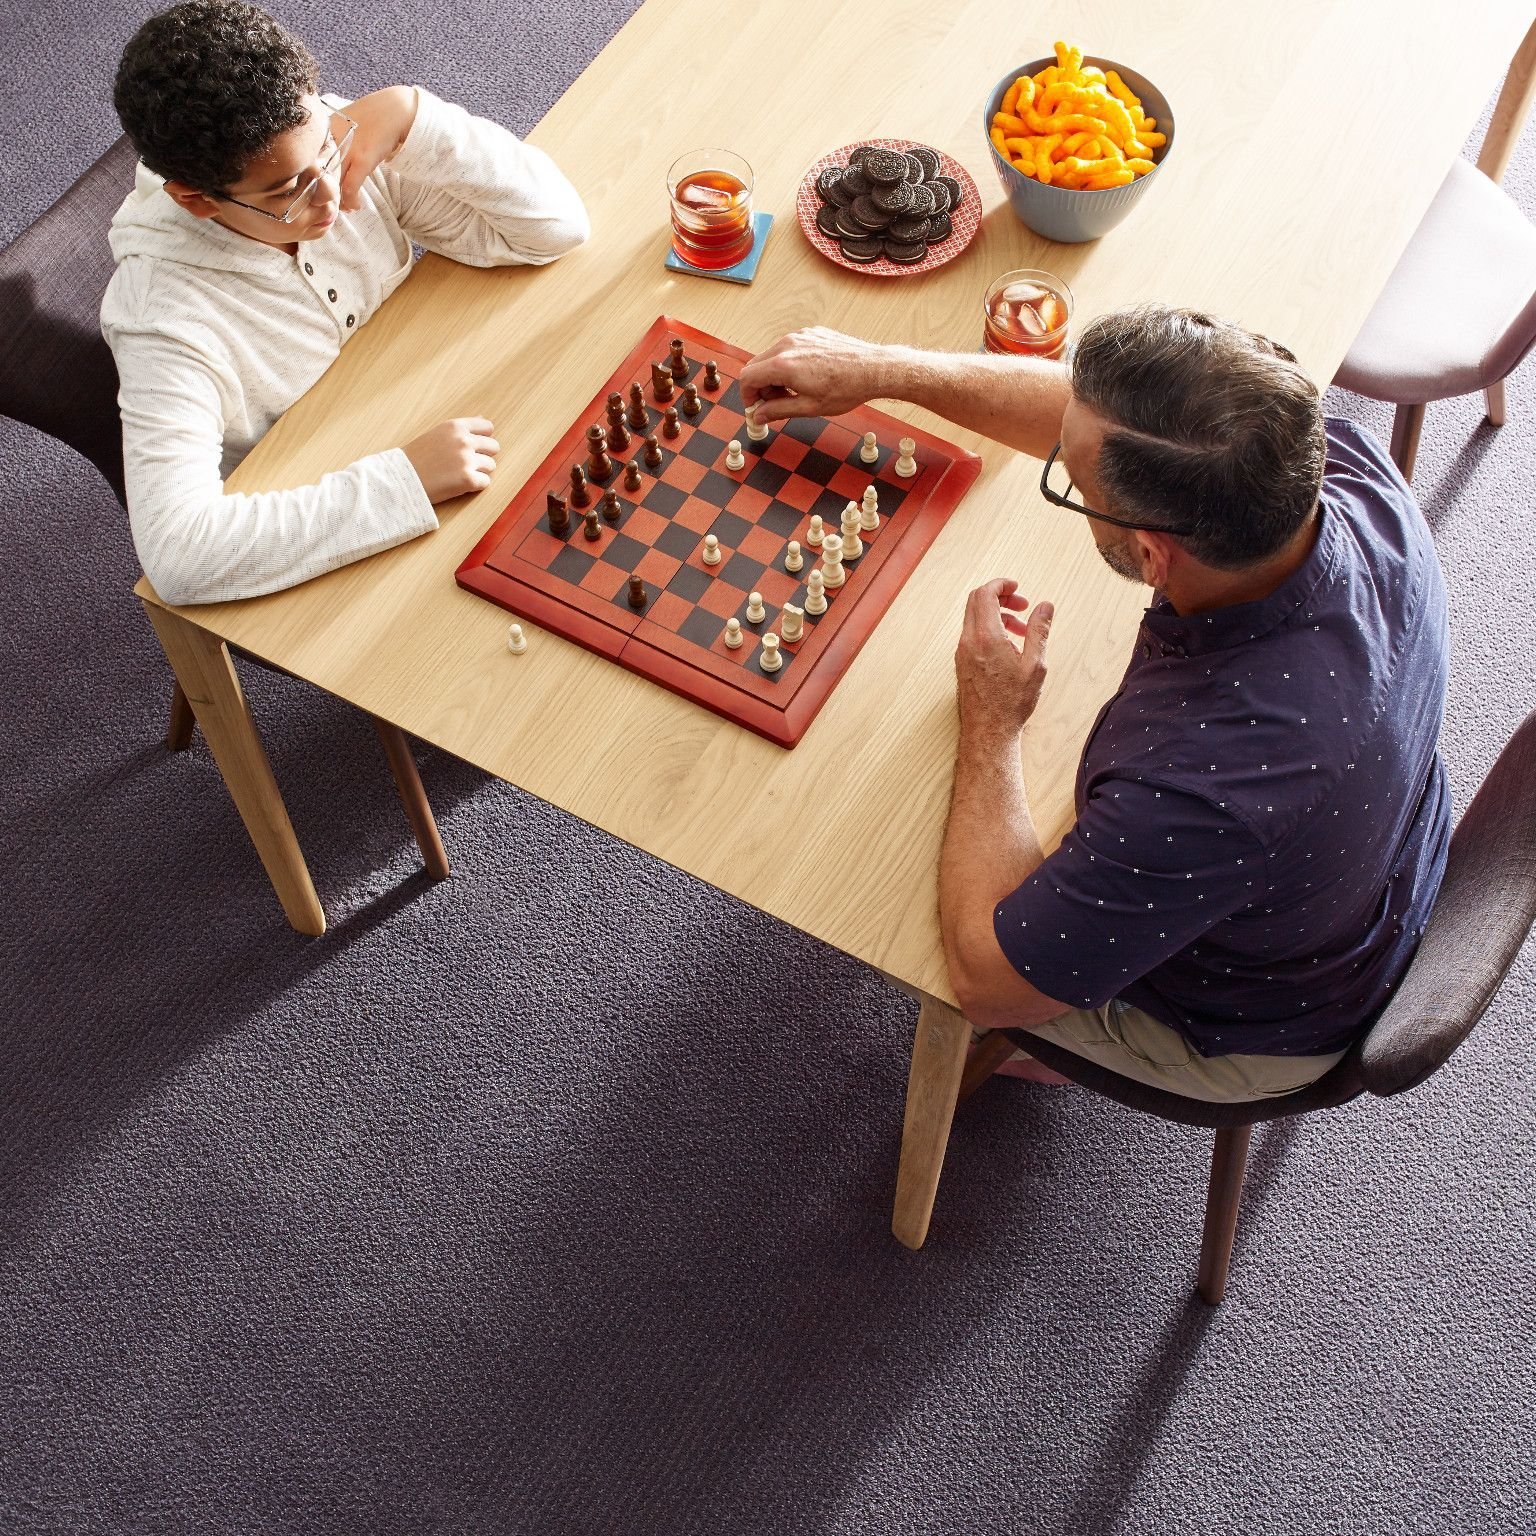 Here are some tips and tricks for preparing before your new floor arrives! | Family sitting across a table playing chess